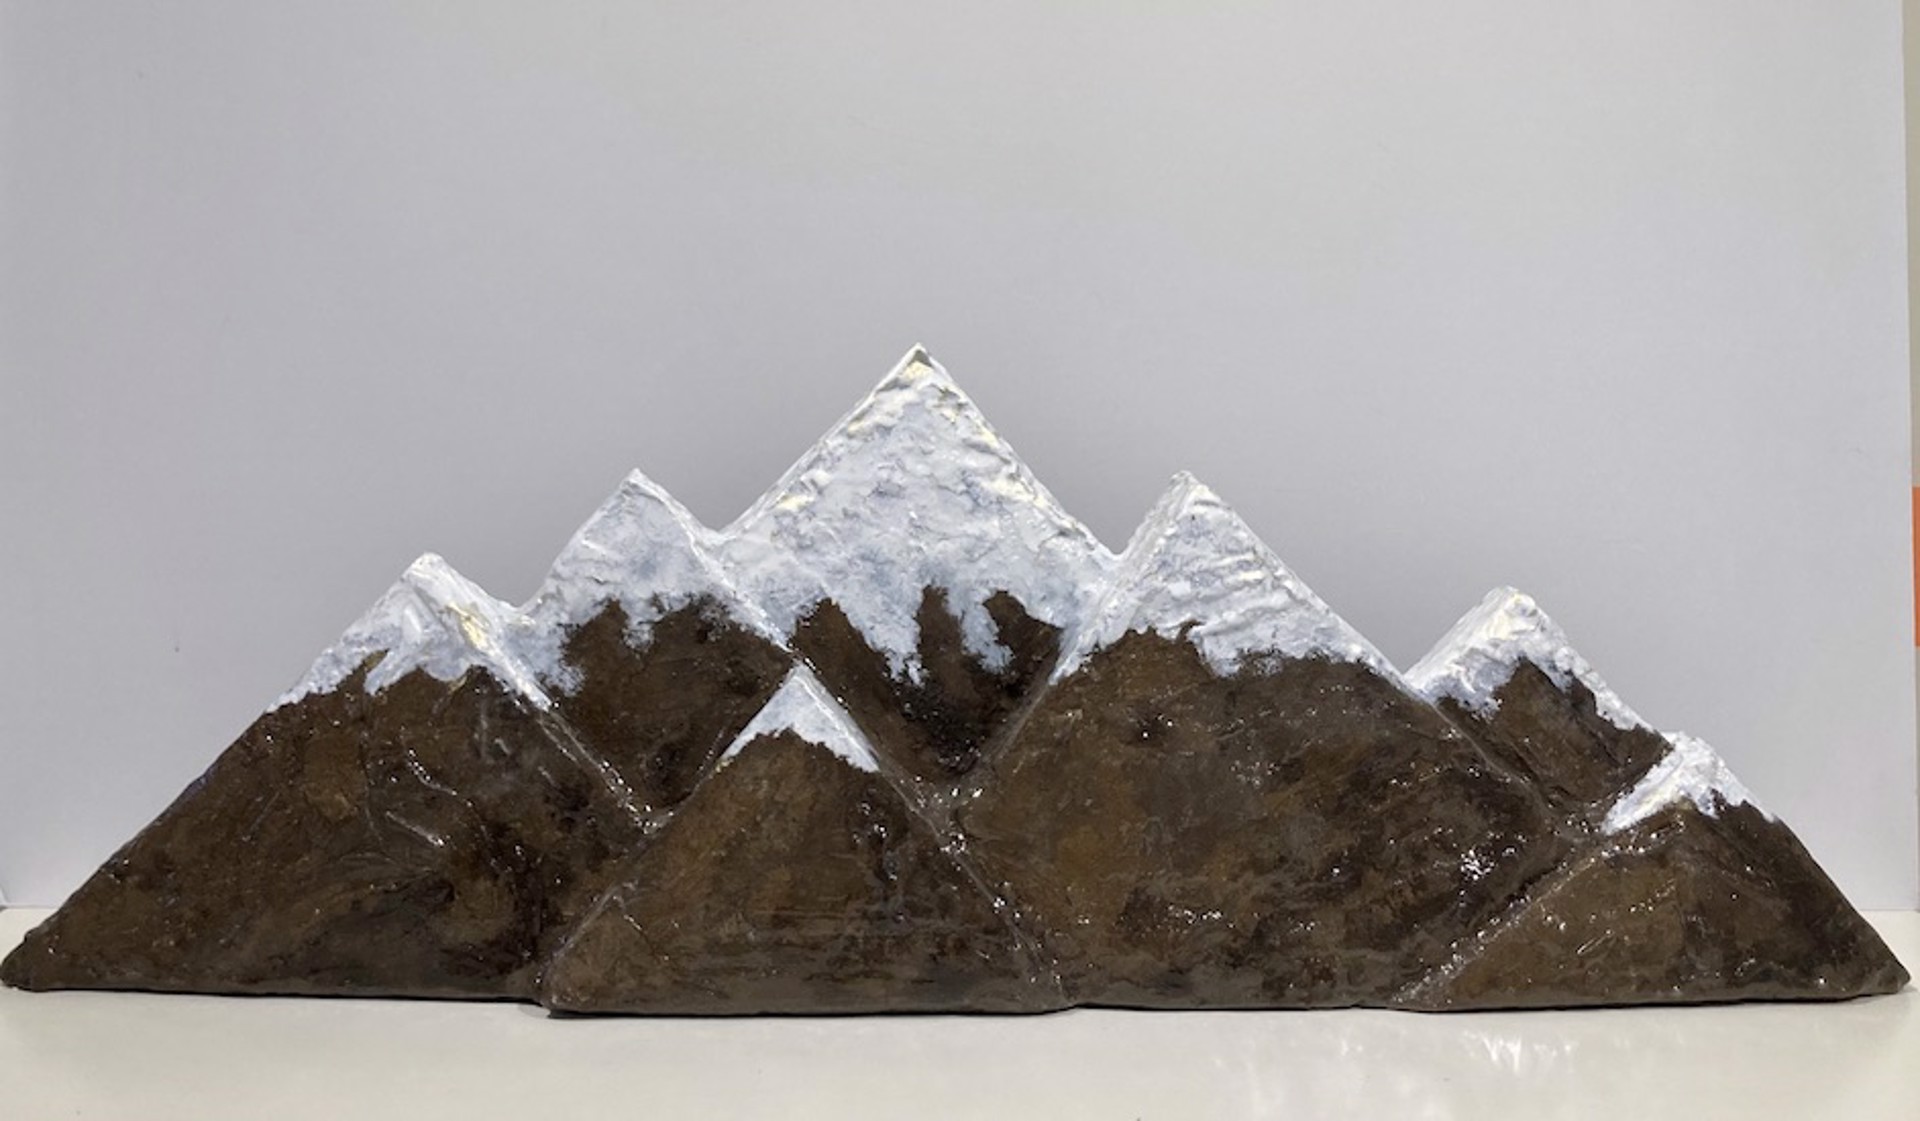 Solid Mountains 3 by Allan Waidman